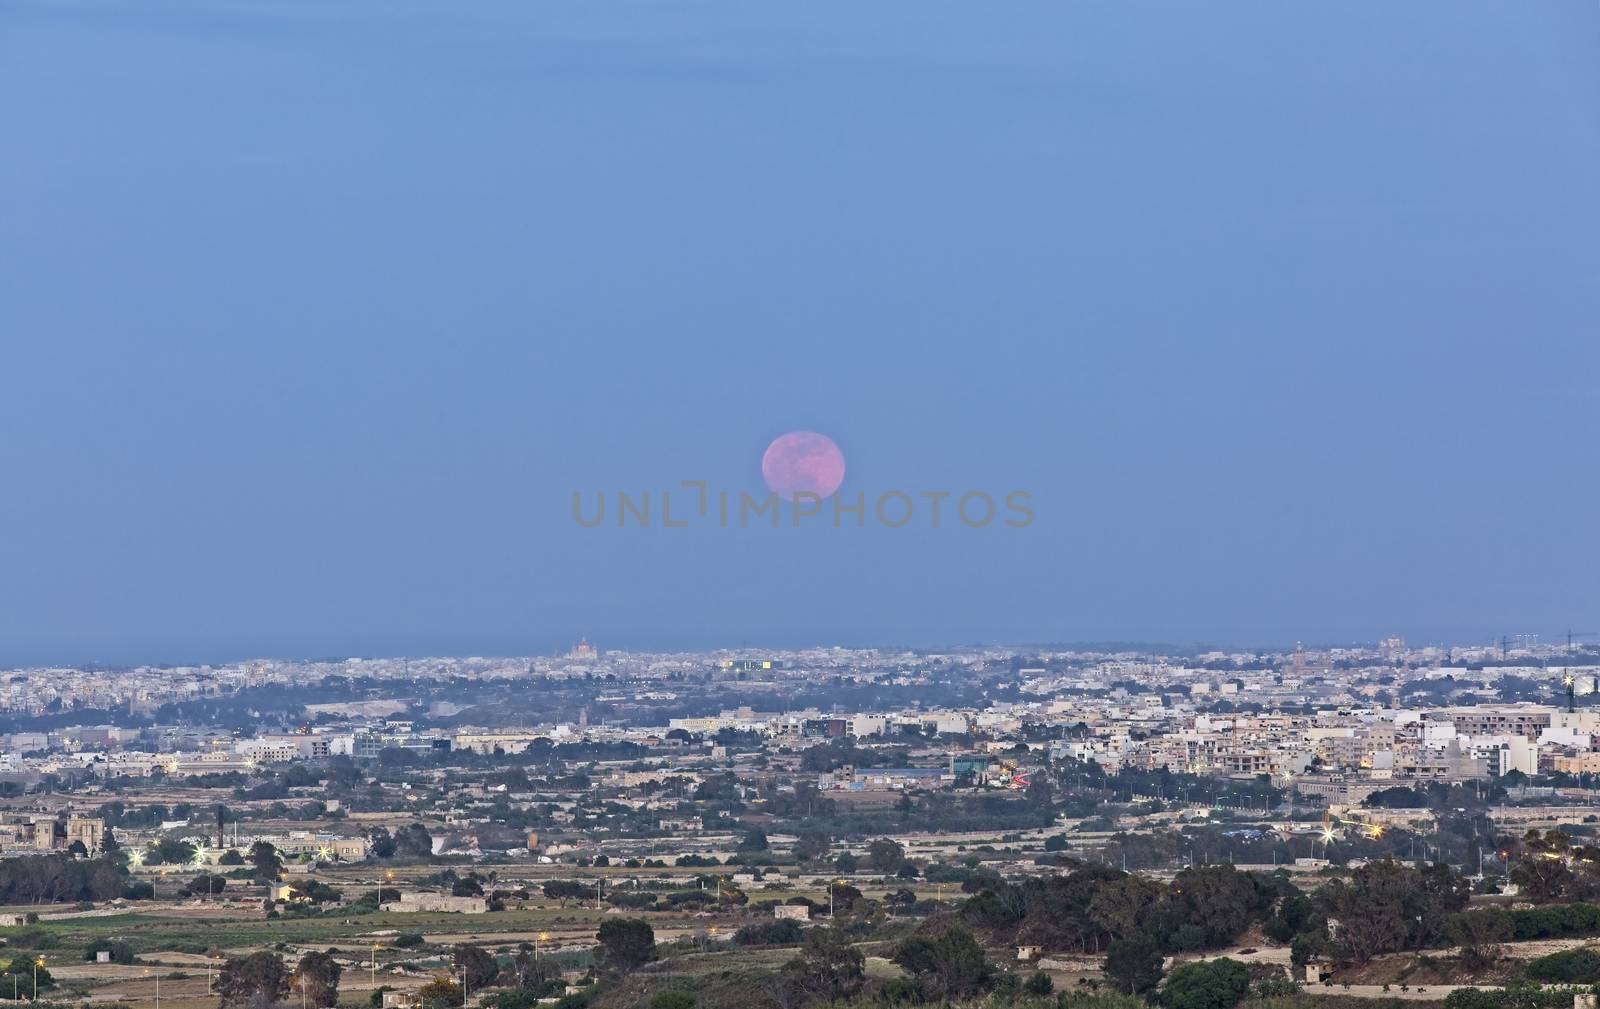 The Super Flower Moon rising over the Maltese landscape in May 2020.